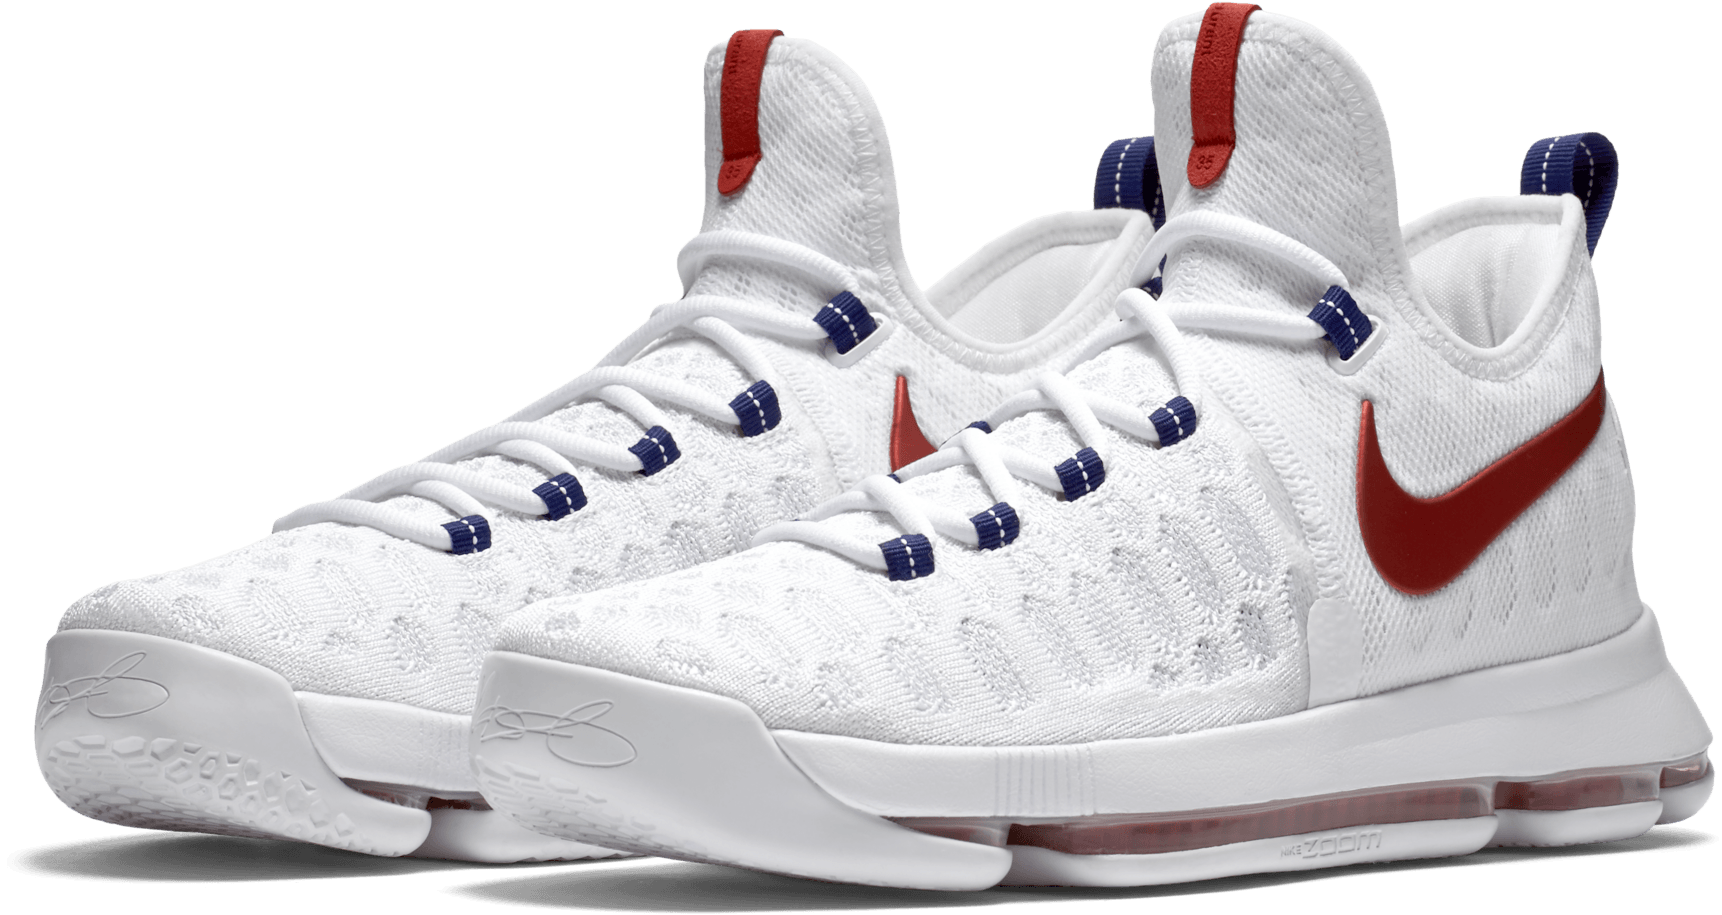 kd 9 performance review